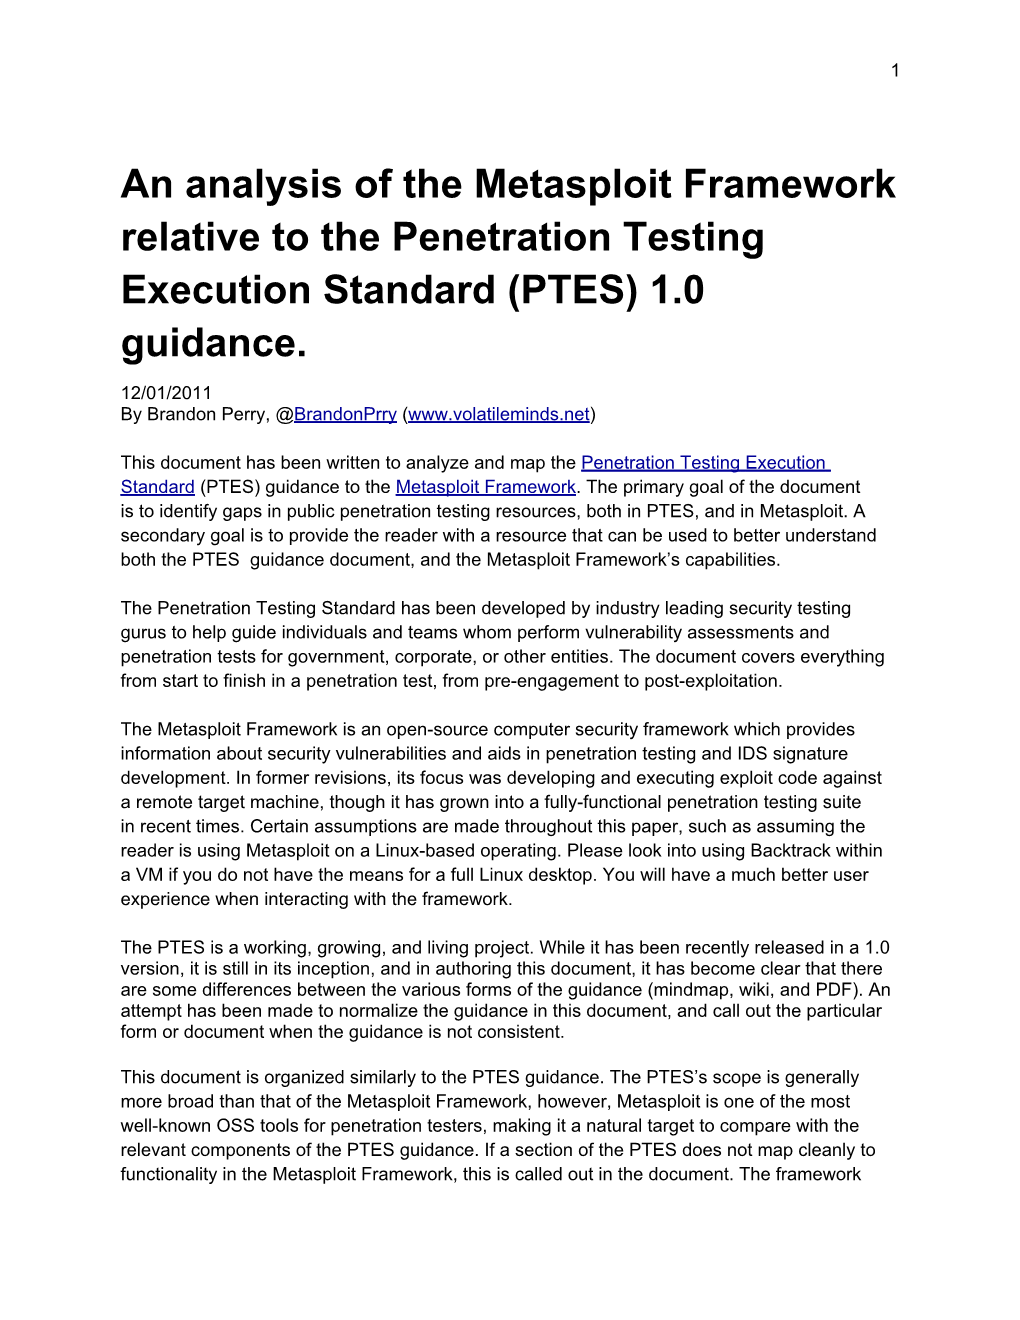 An Analysis of the Metasploit Framework Relative to the Penetration Testing Execution Standard (PTES) 1.0 Guidance